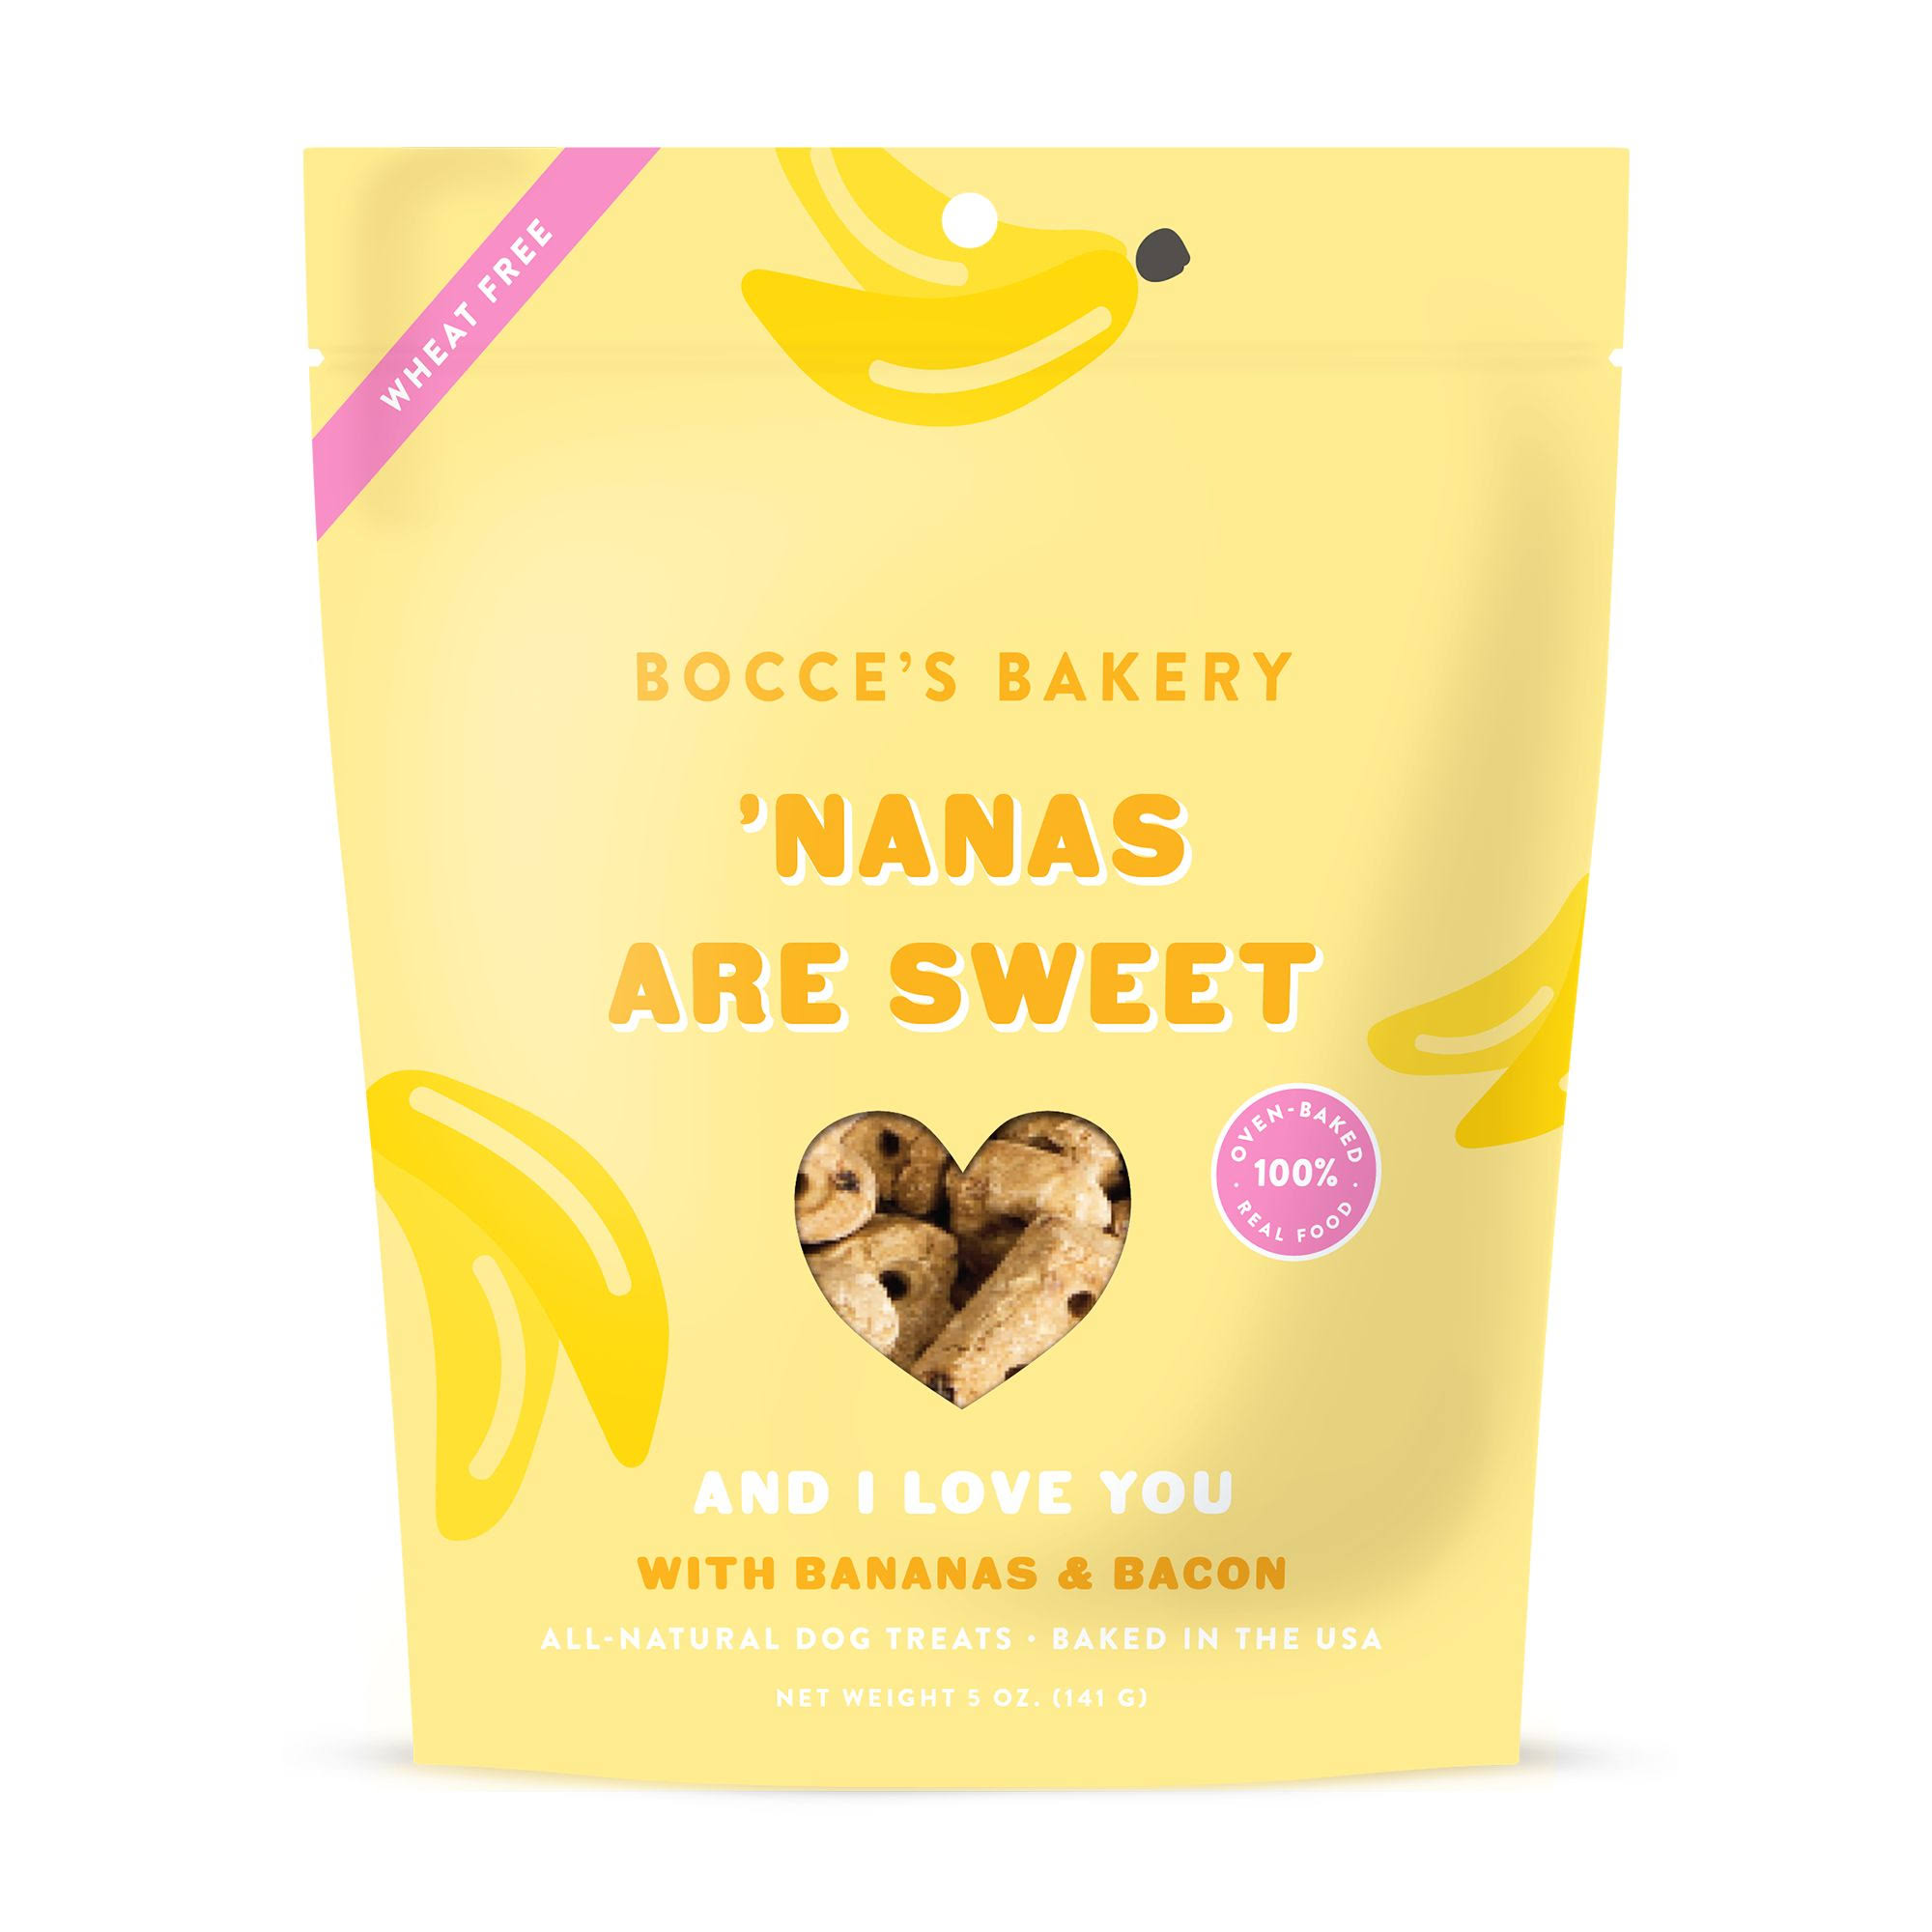 Bocce's Bakery 'Nanas Are Sweet 5 oz Biscuits Dog Treats